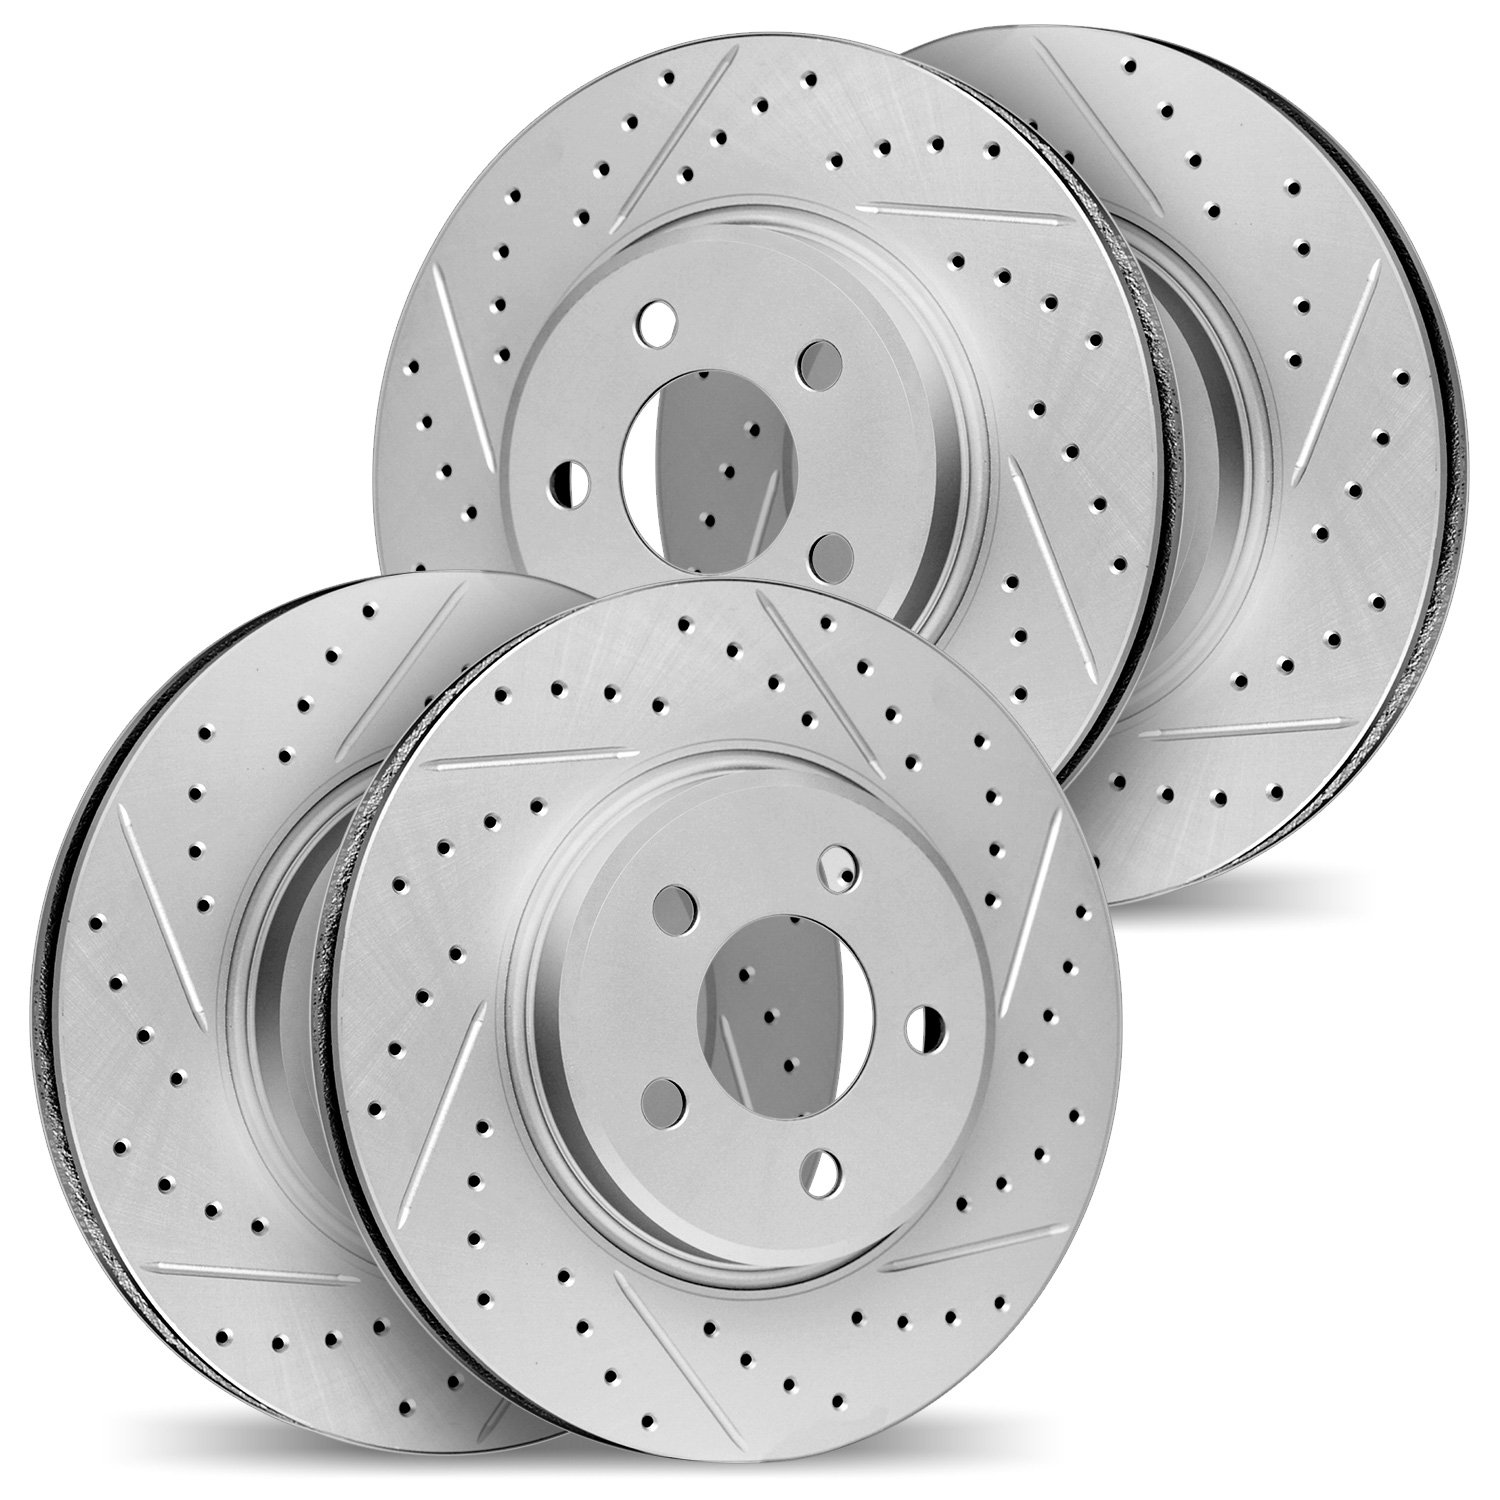 2004-31039 Geoperformance Drilled/Slotted Brake Rotors, 1997-2000 BMW, Position: Front and Rear